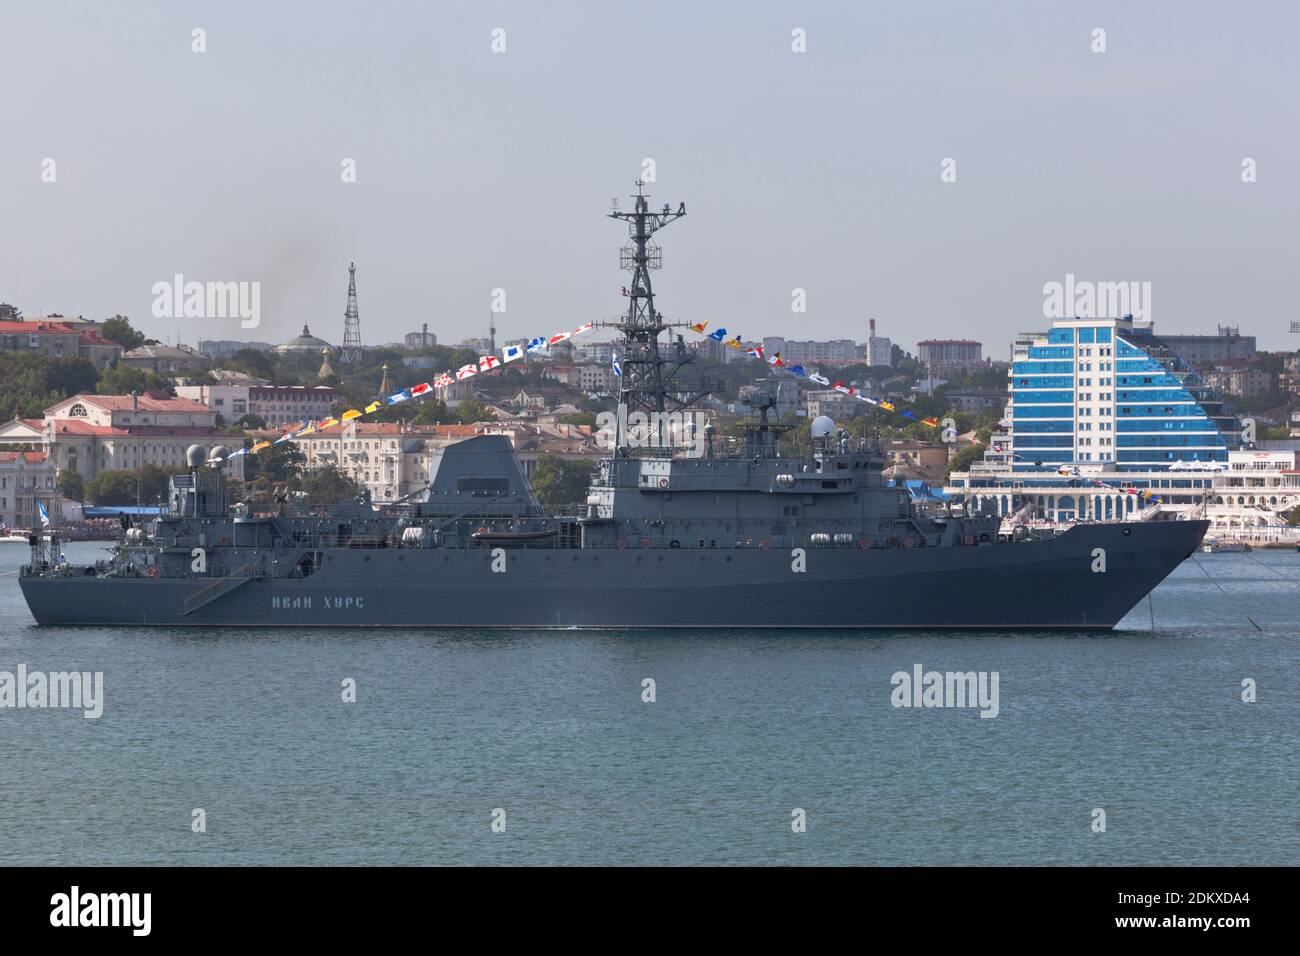 Sevastopol, Crimea, Russia - July 26, 2020: The reconnaissance ship Ivan Khurs at the parade in honor of the Day of the Navy against the background of Stock Photo